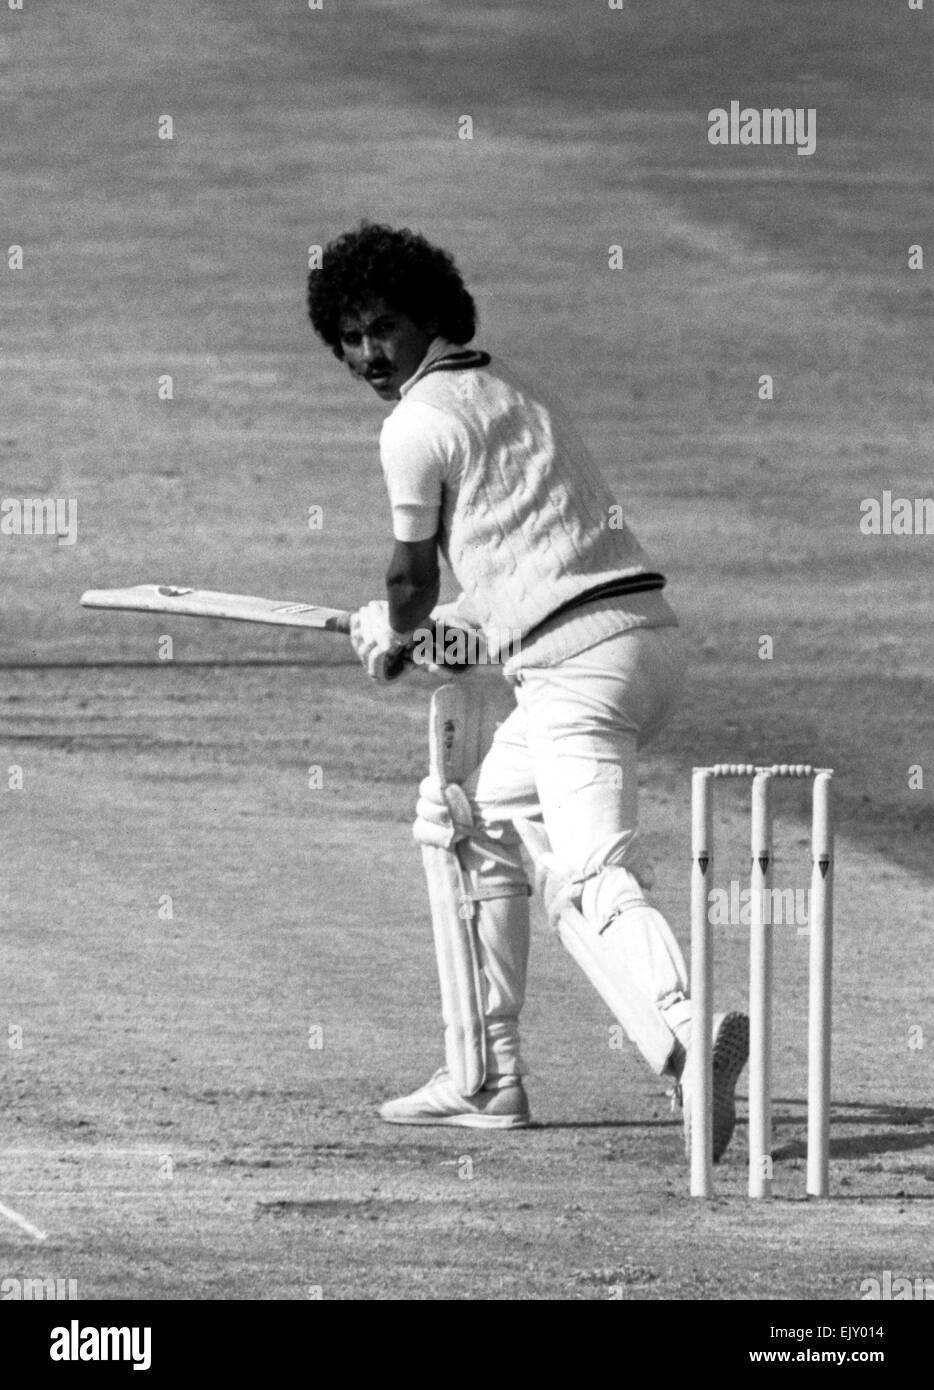 England v West Indies. Larry Gomes in action in the 1st innings. 19th July 1984. Stock Photo